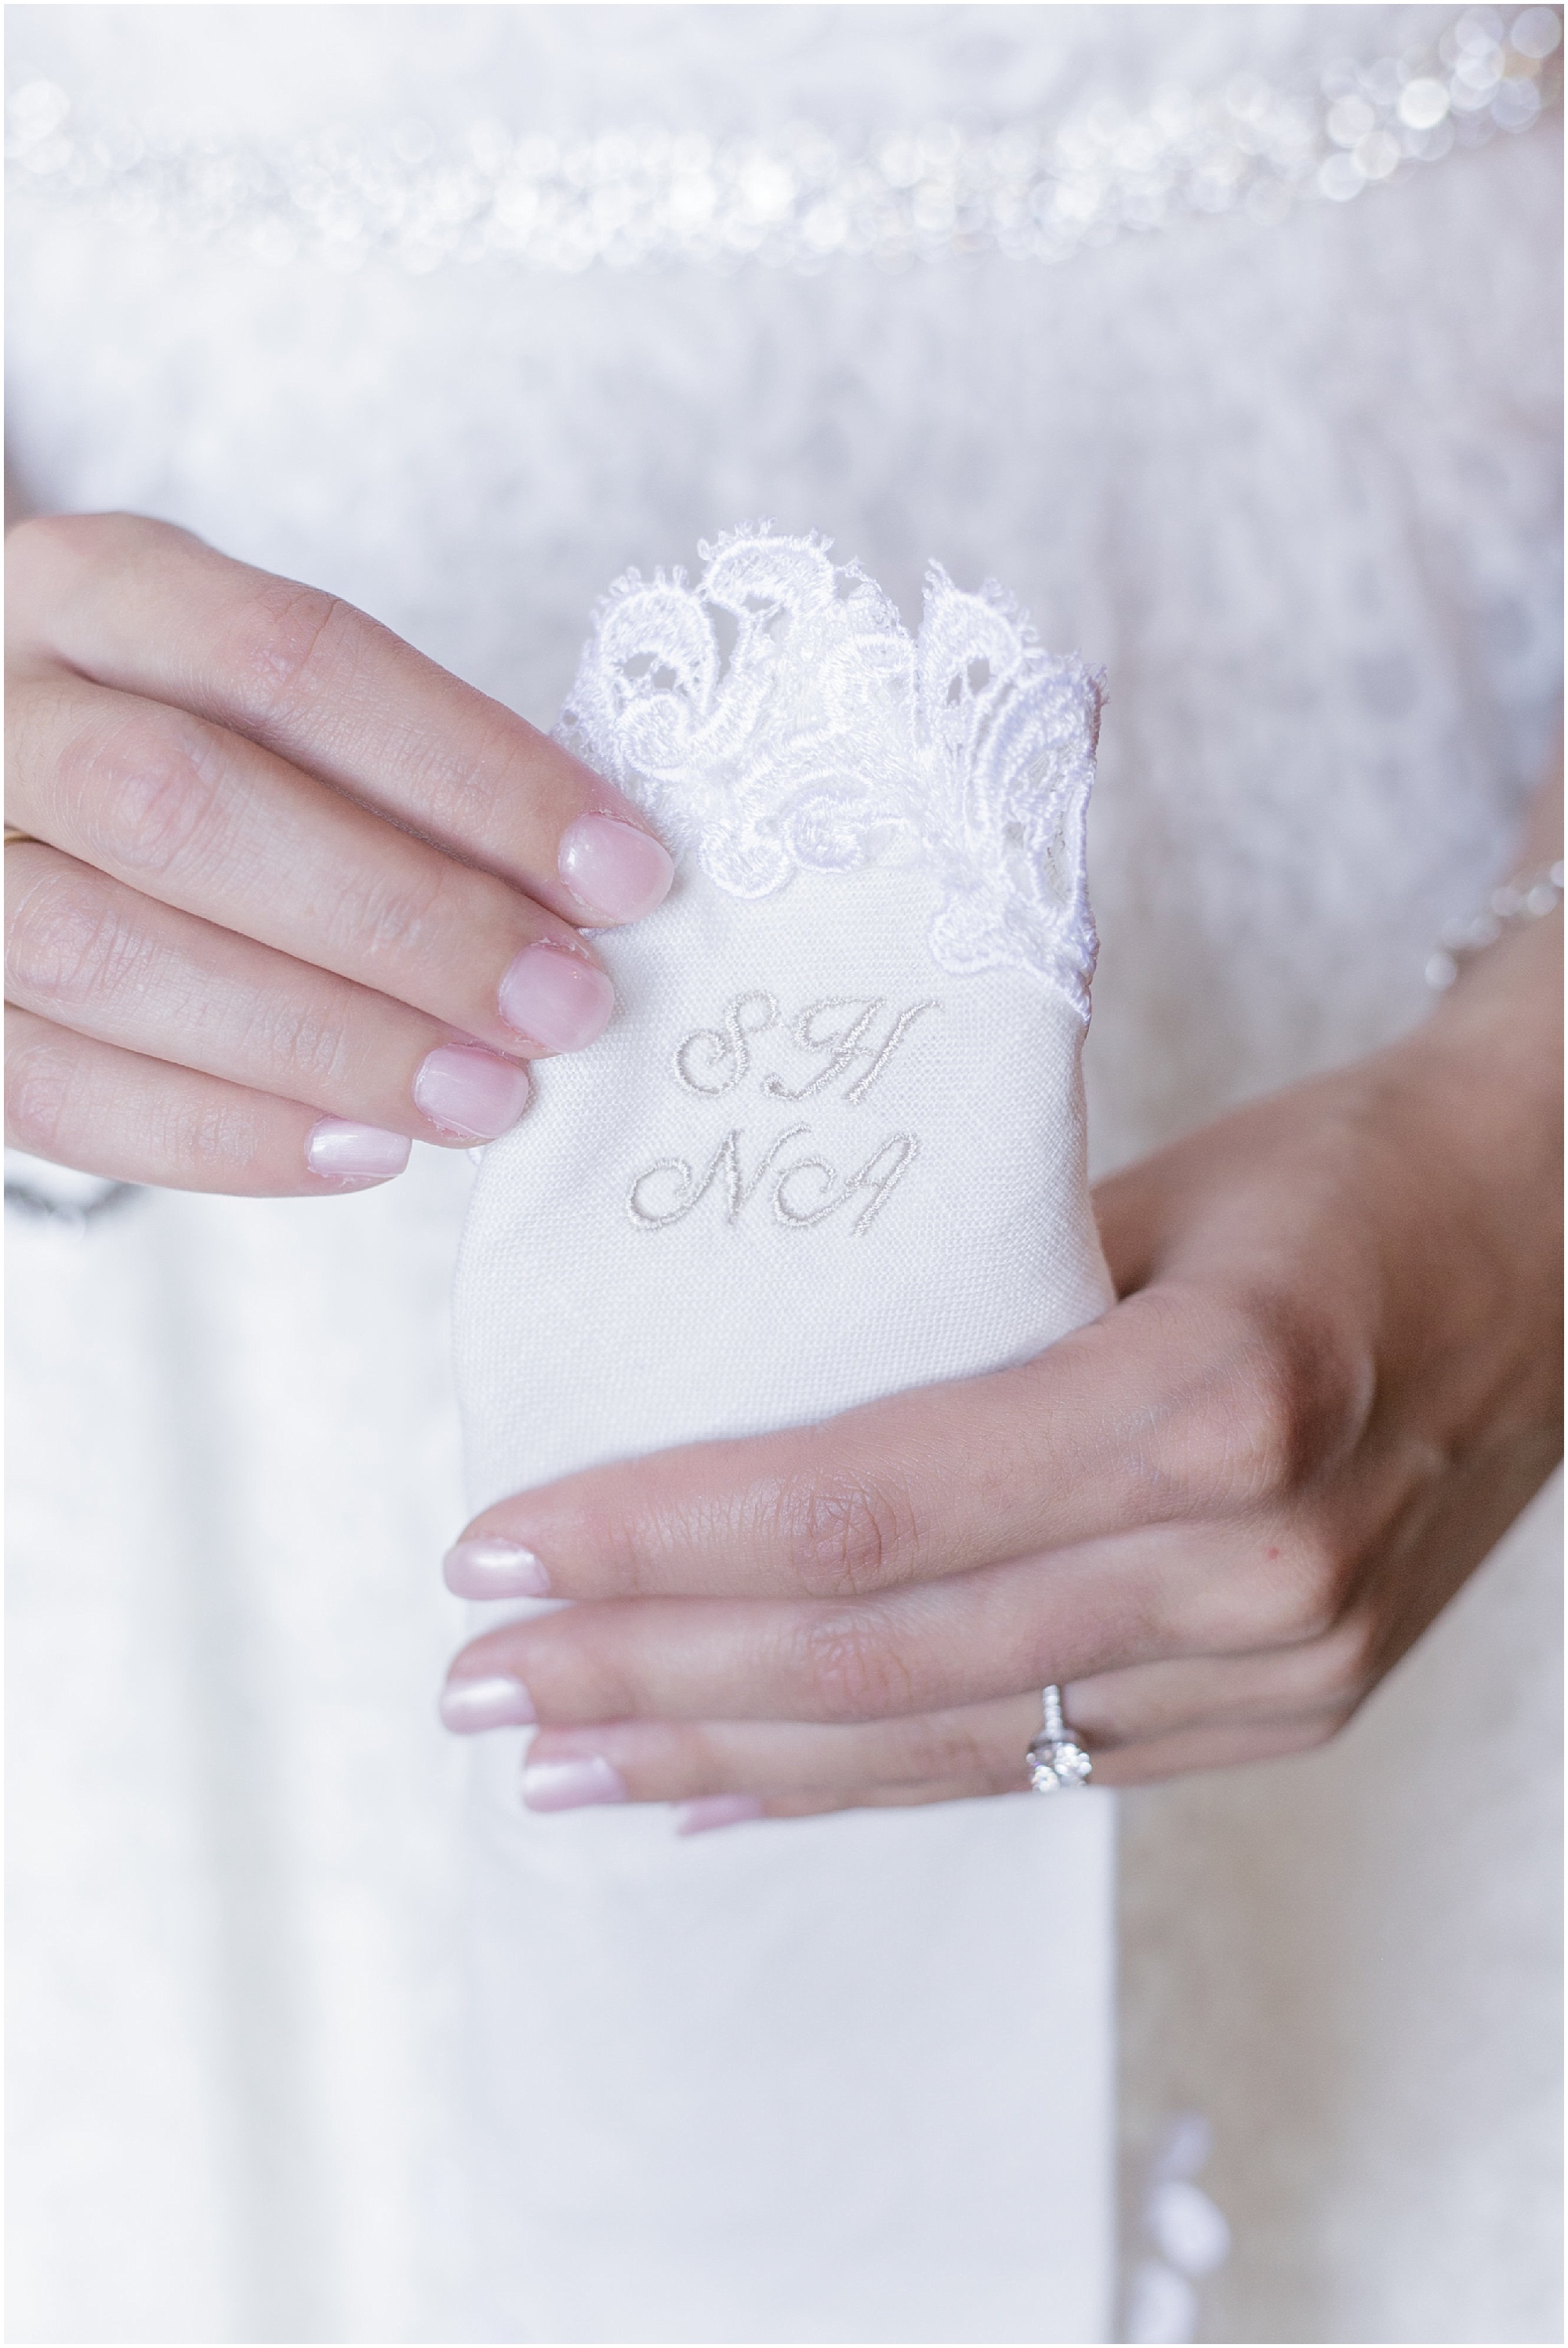 White handkerchief with bride and grooms initials embroidered in it. 